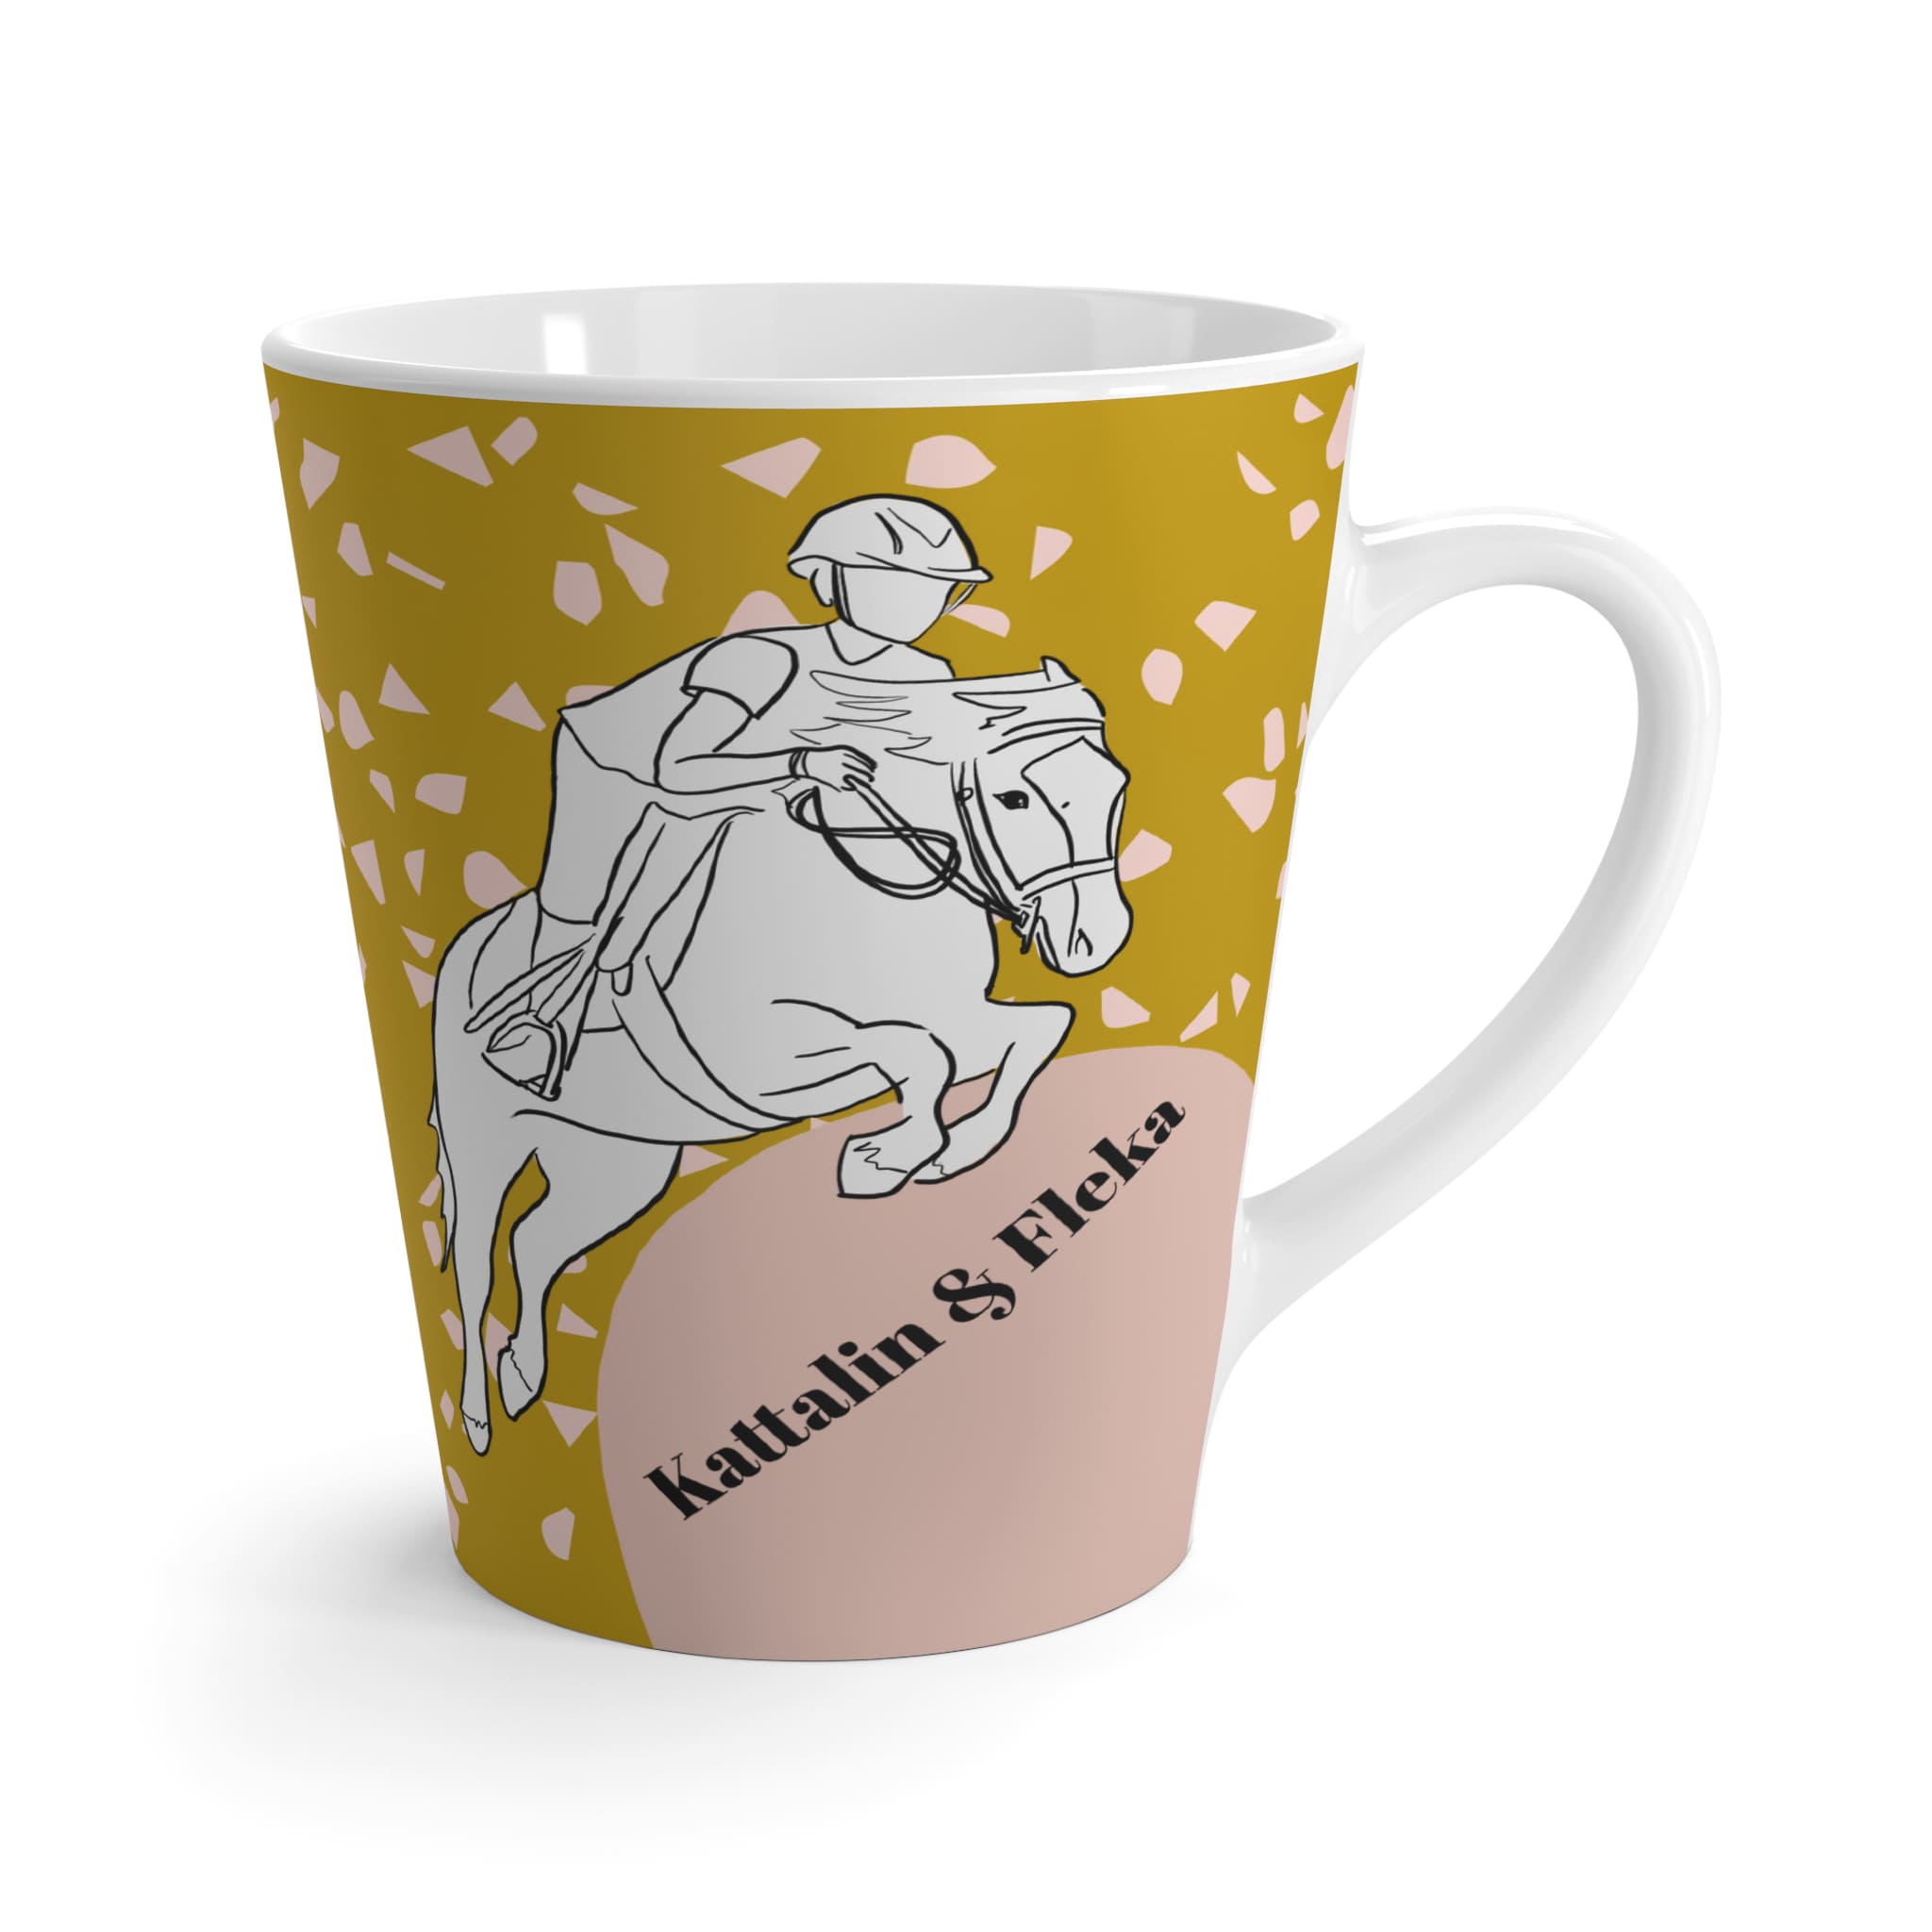 custom fashion latte mug with line art illustration of girl and horse jumping with their names in fun color blocking terrazzo pattern